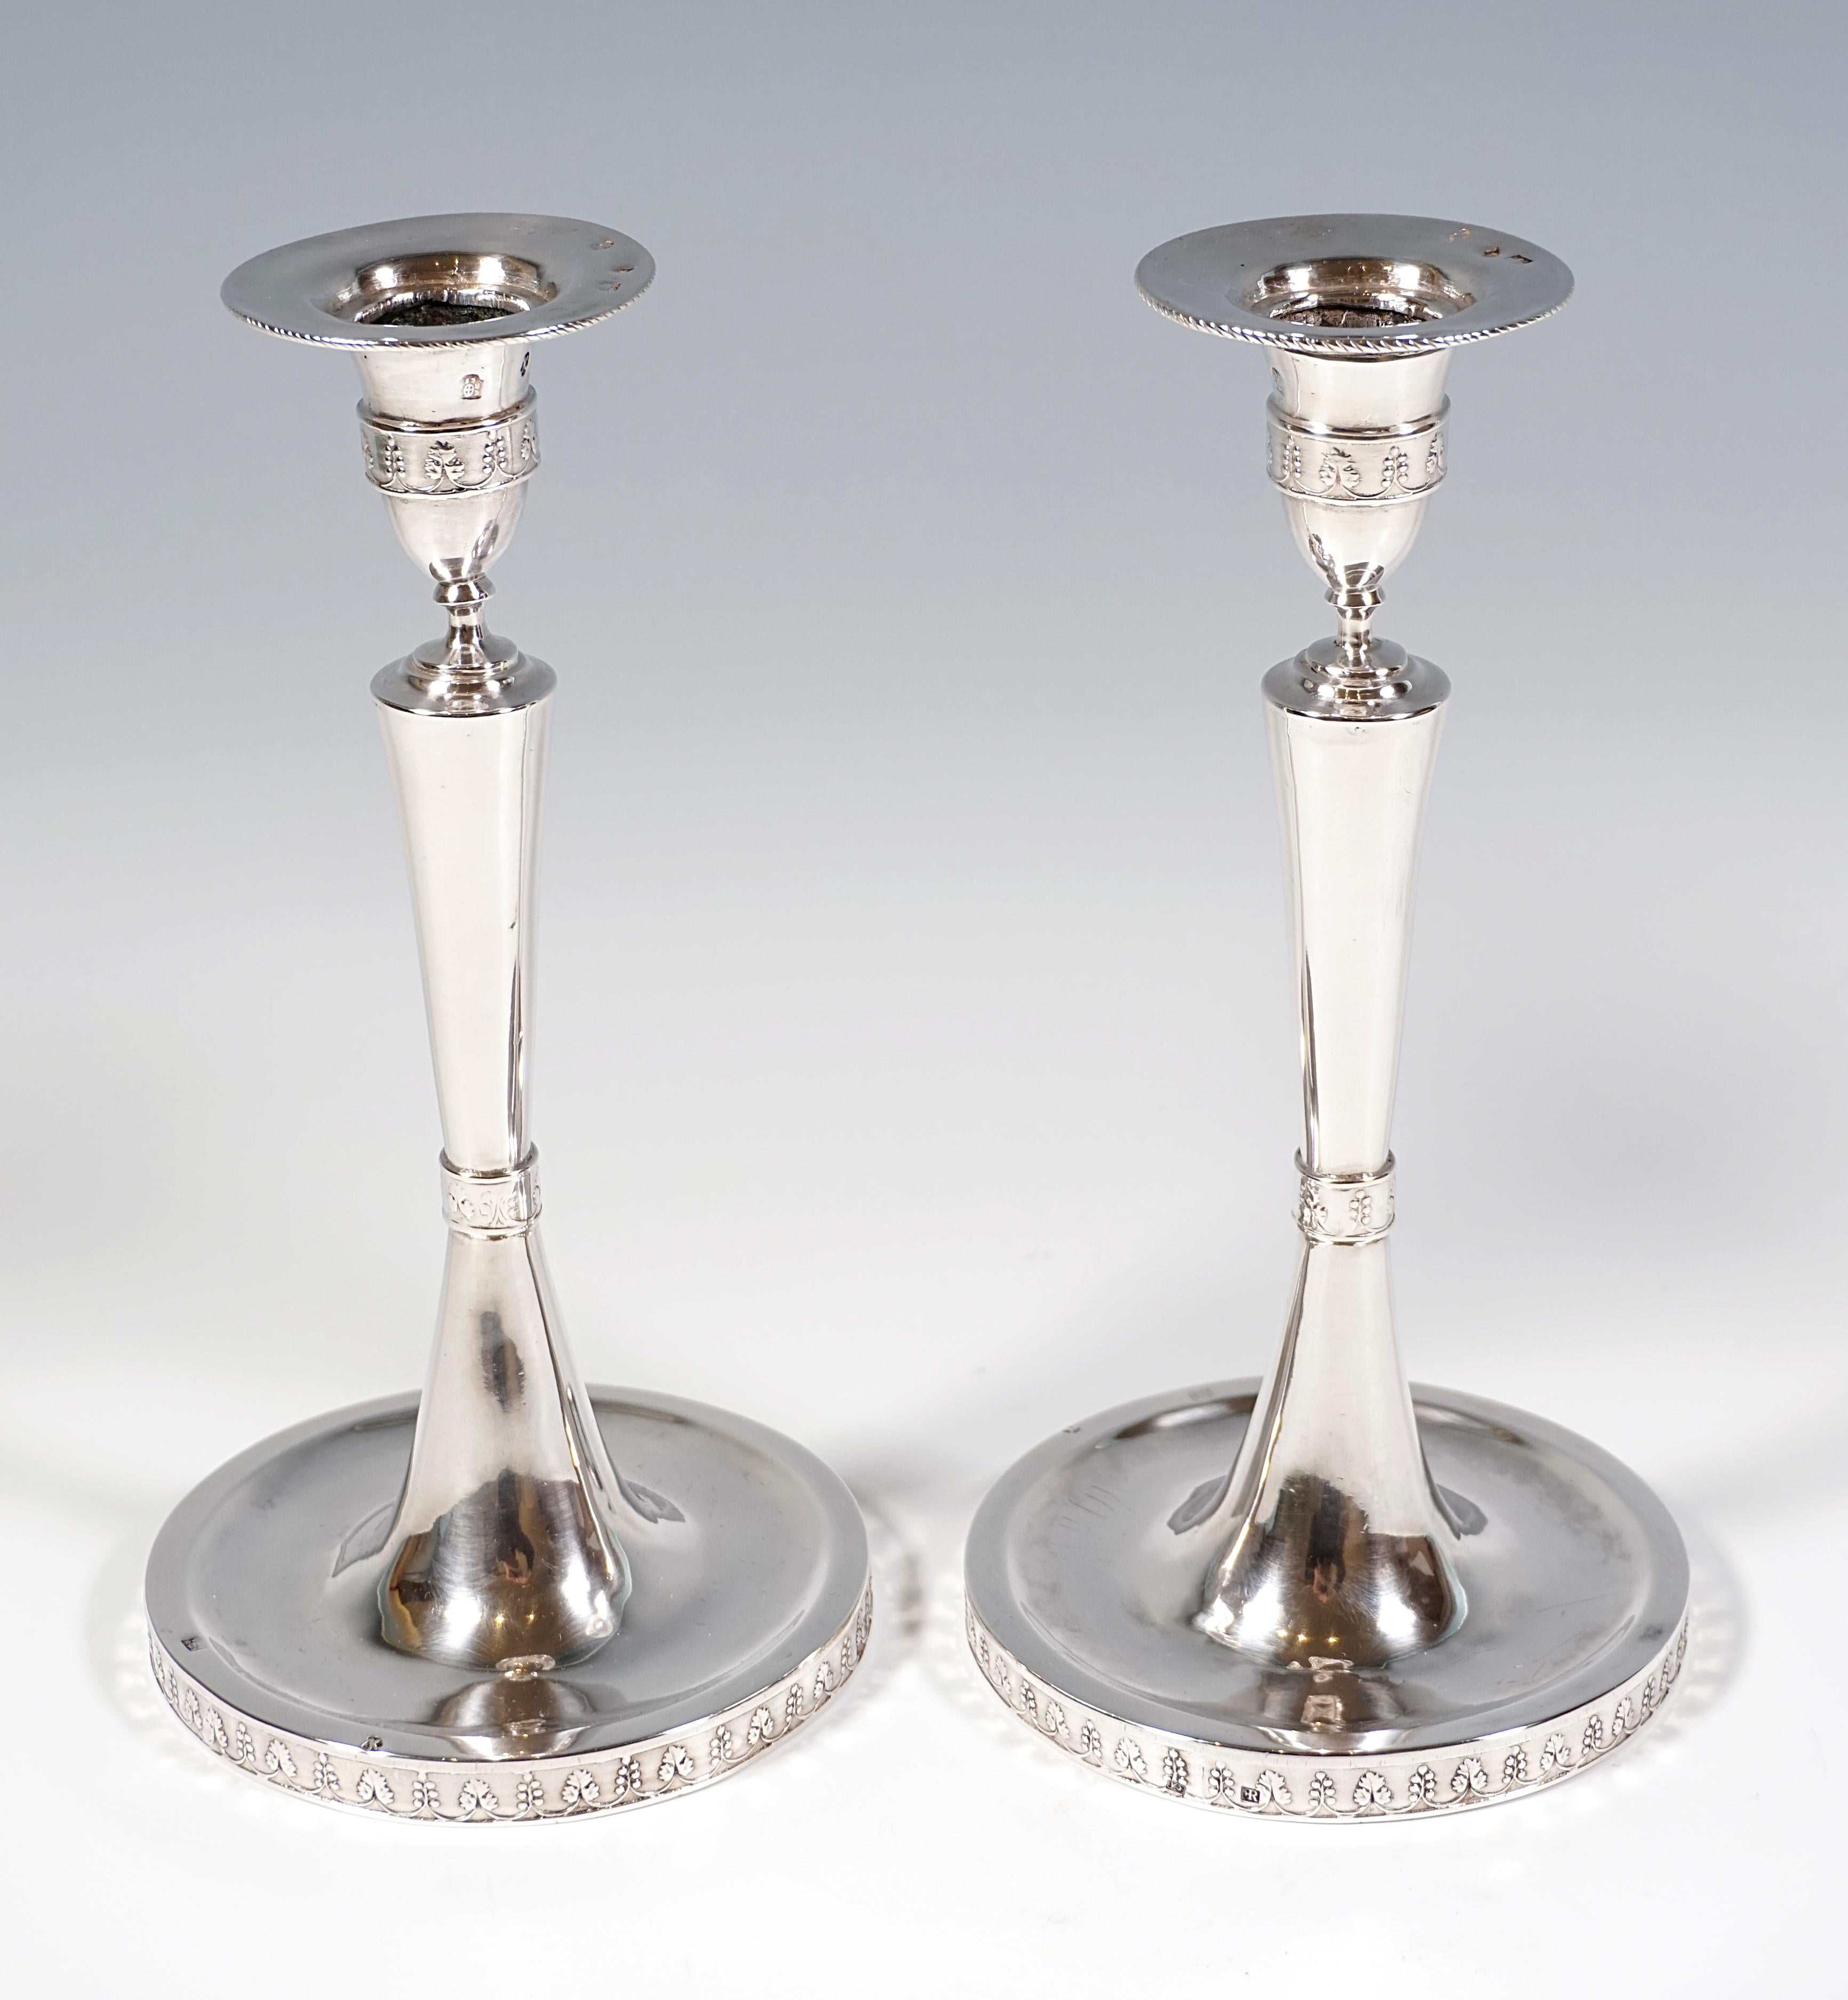 Two elegant, simple silver candlesticks on a round base, the smooth shaft raised in the centre with a constriction formed by a beaded band in relief, the shaft widening conically towards the top with a vase-shaped spout on top, relief bands on the